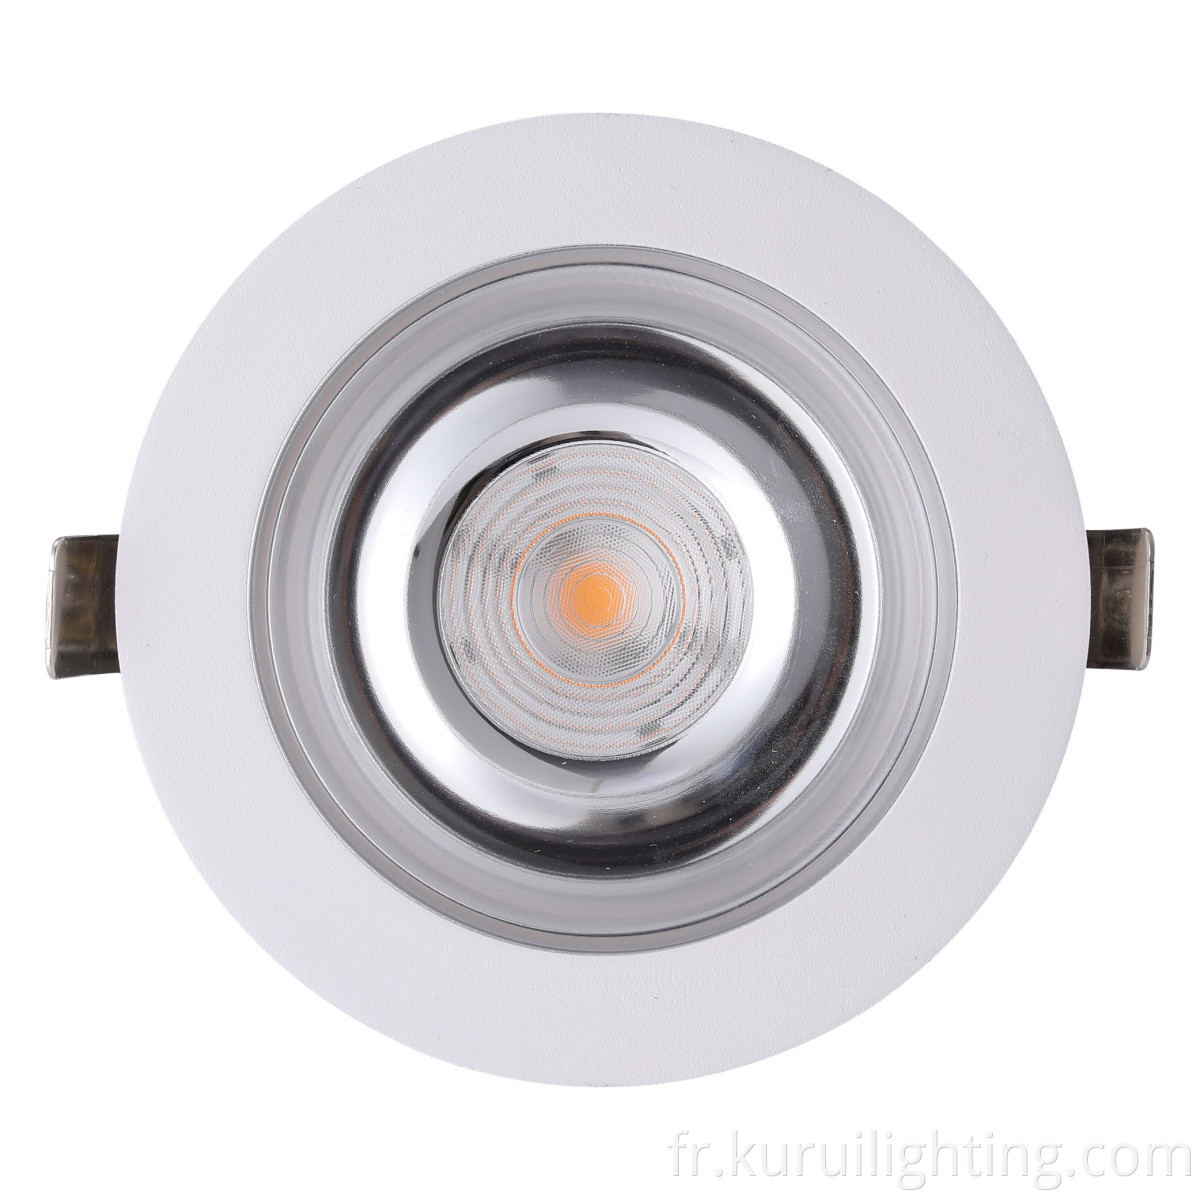 Commercial Led Recessed Downlights